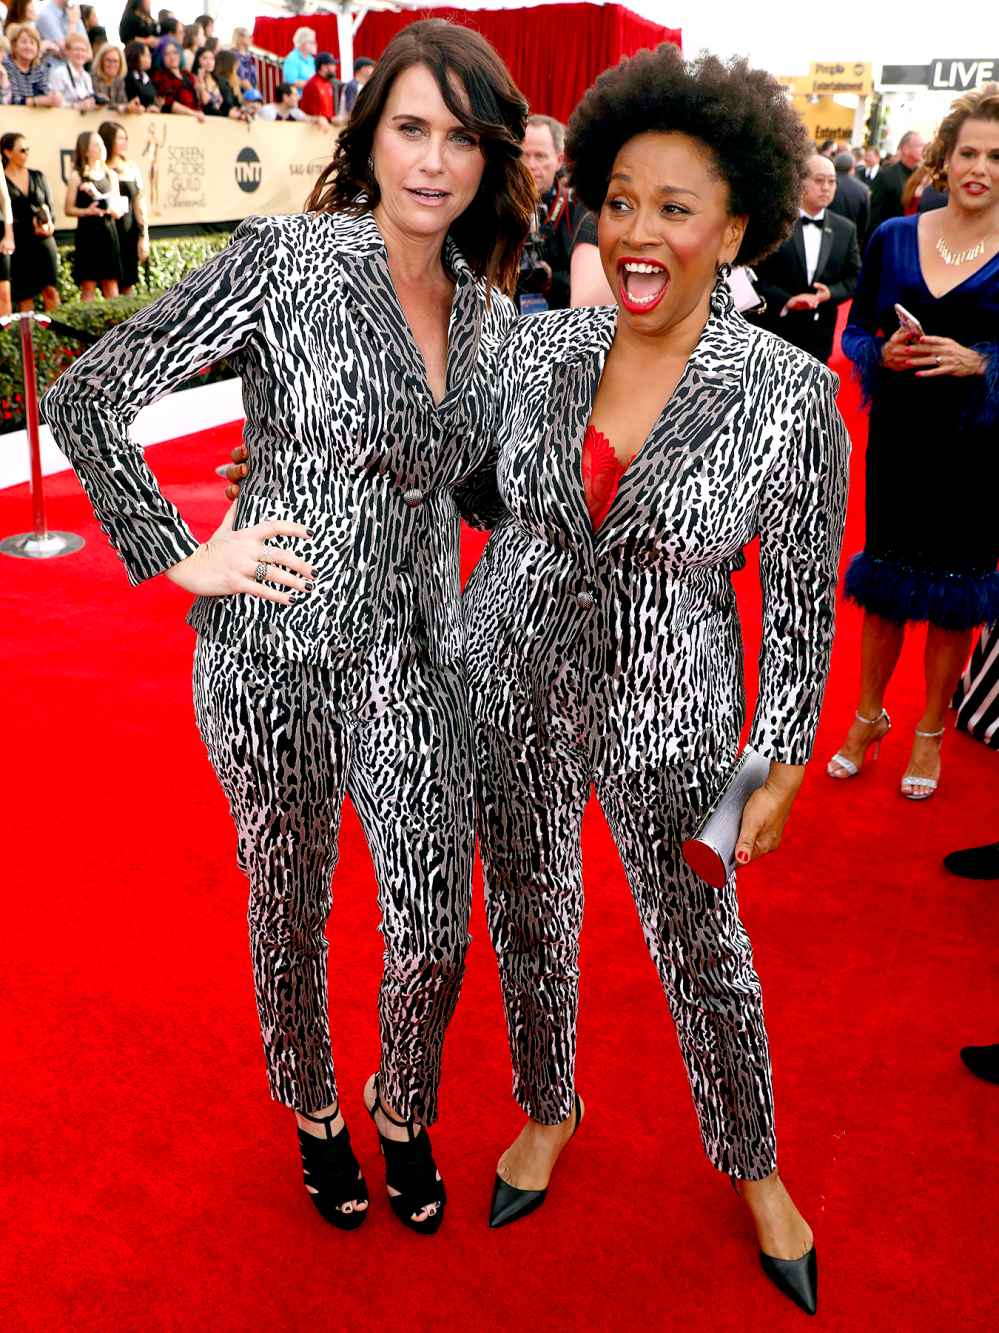 Amy Landecker, left, and Jenifer Lewis arrive at the 23rd annual Screen Actors Guild Awards at the Shrine Auditorium & Expo Hall on Sunday, Jan. 29, 2017, in Los Angeles.